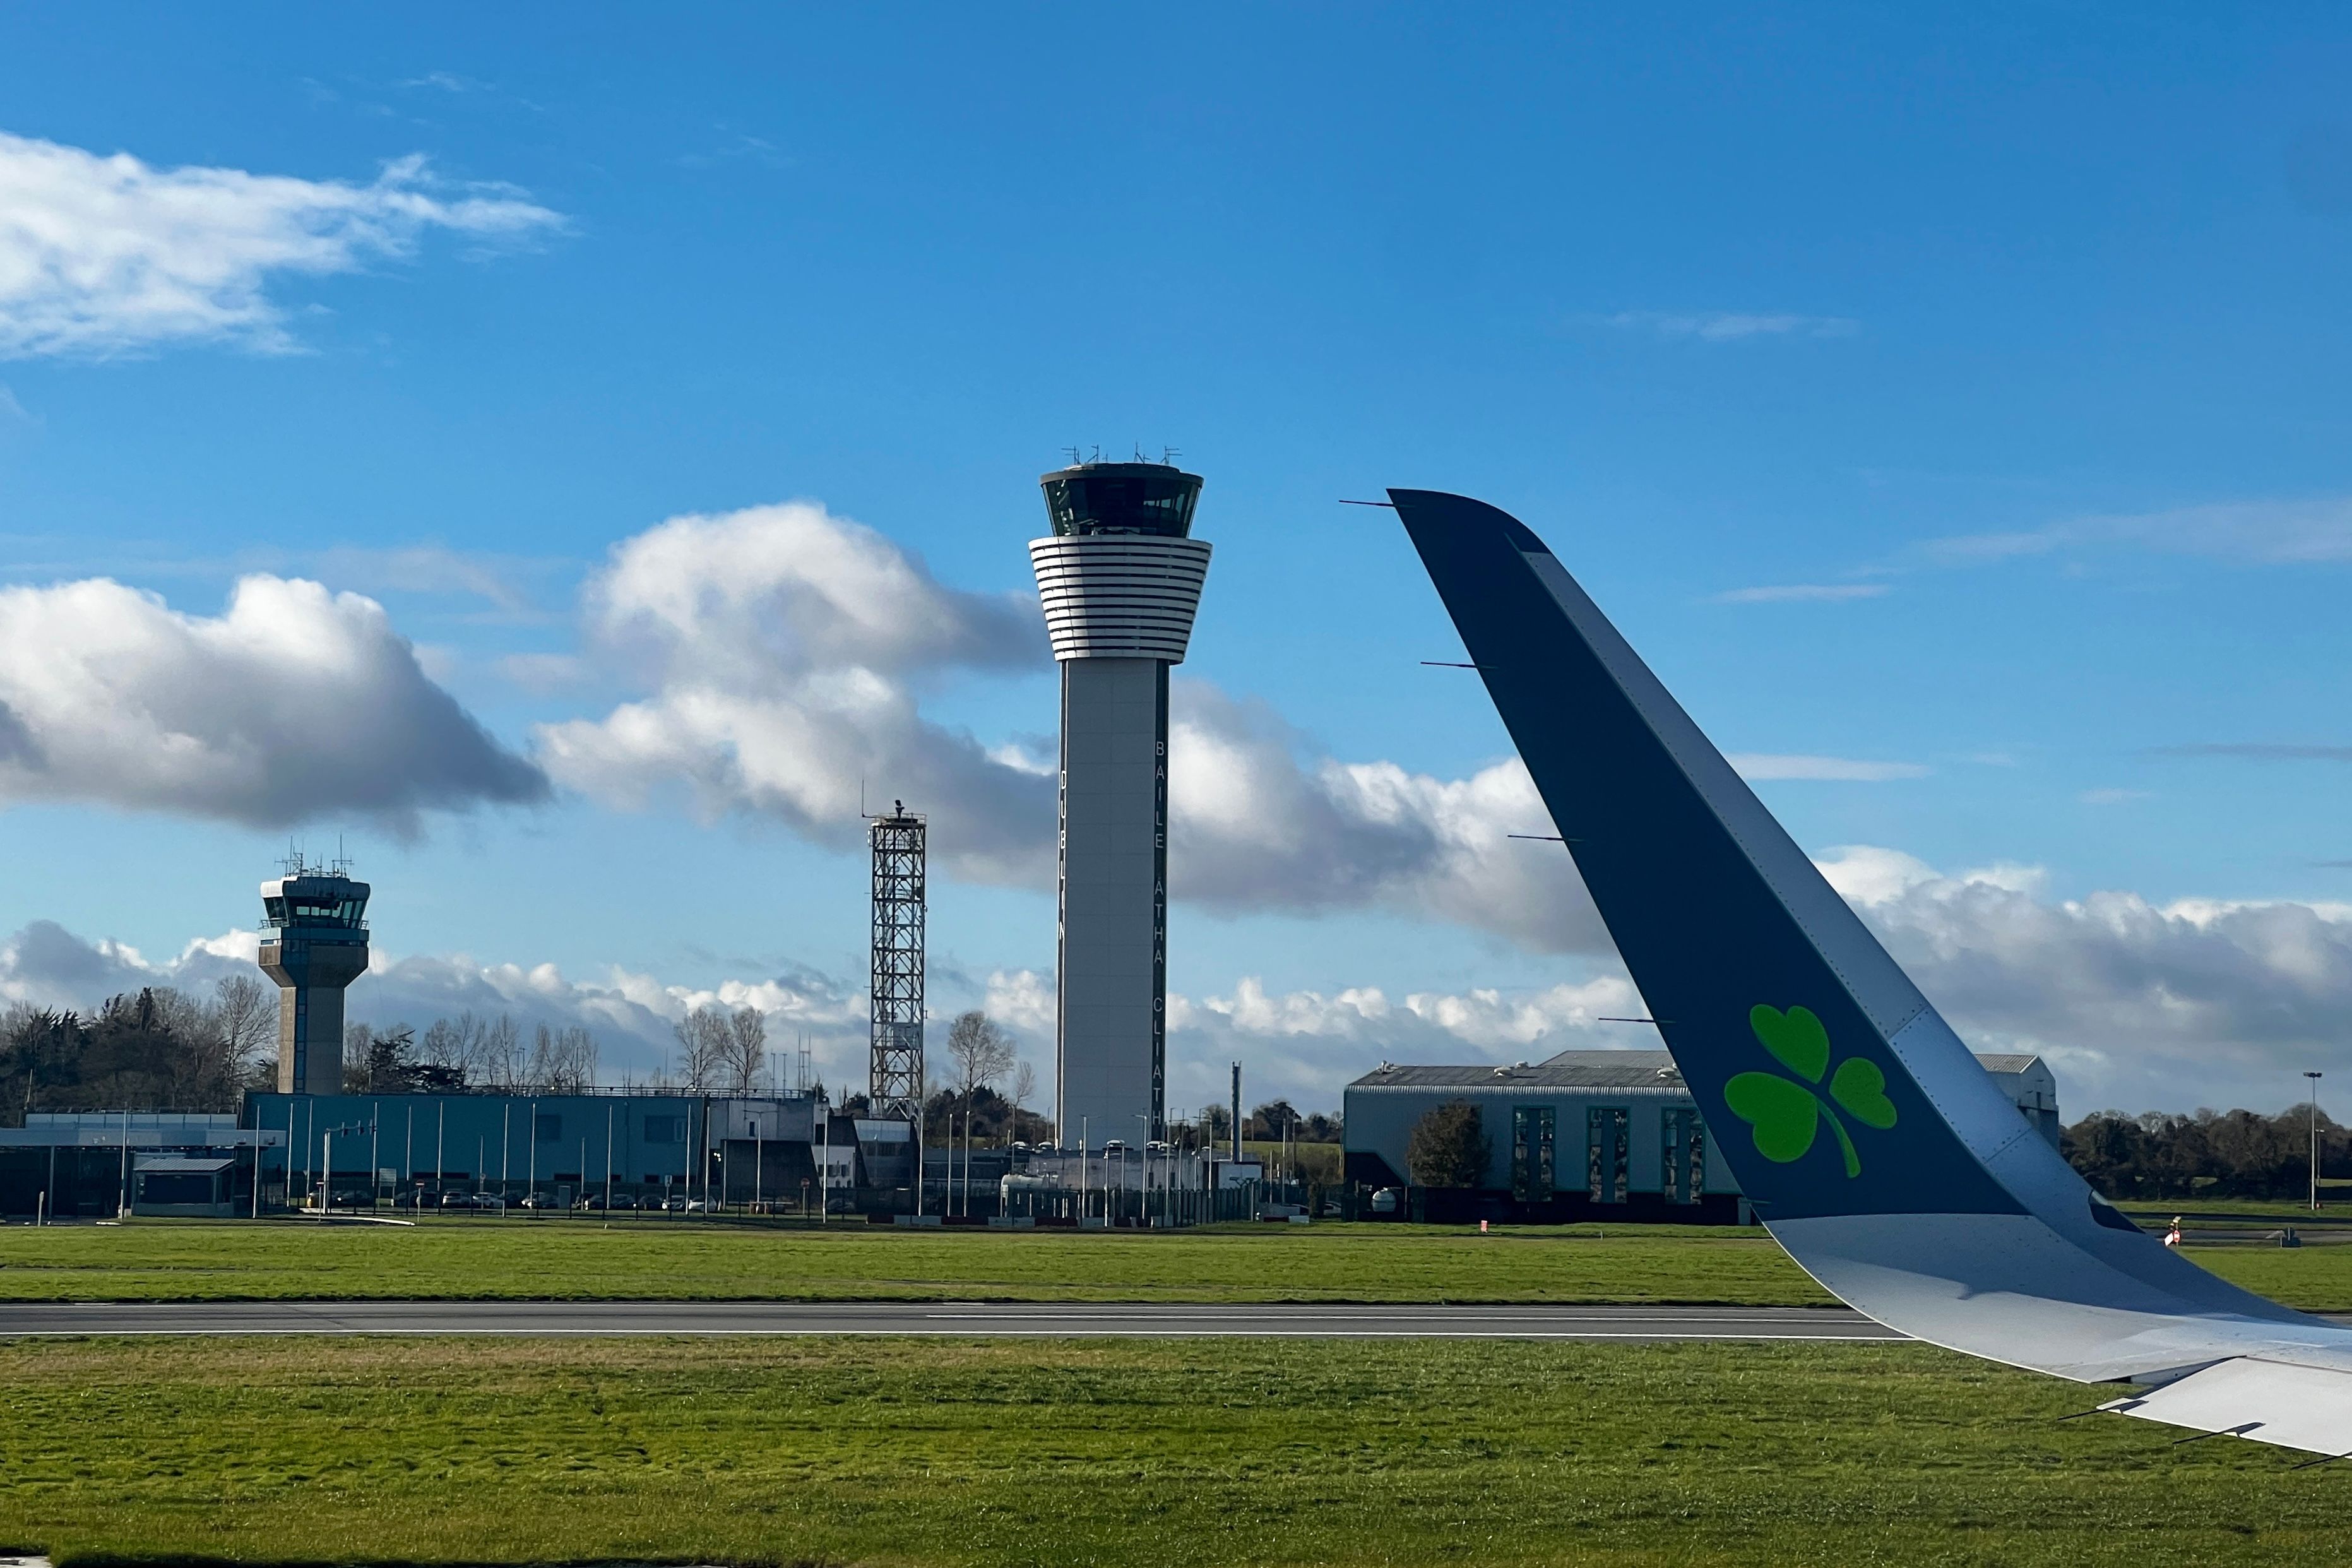 The view of the Dublin Airport Control Tower from an Aer Lingus aircraft window.